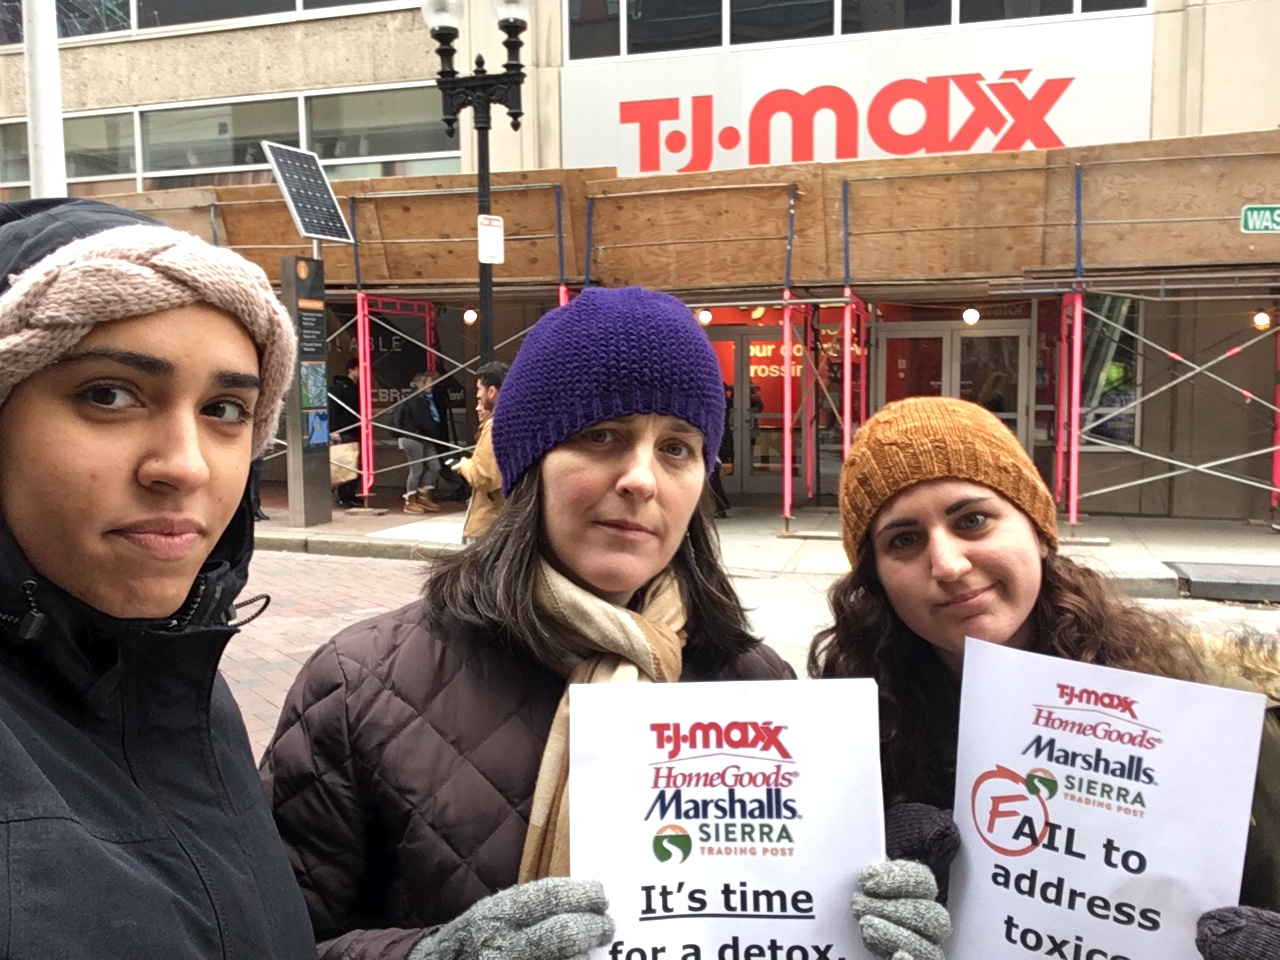 It's time for TJX to get rid of toxics